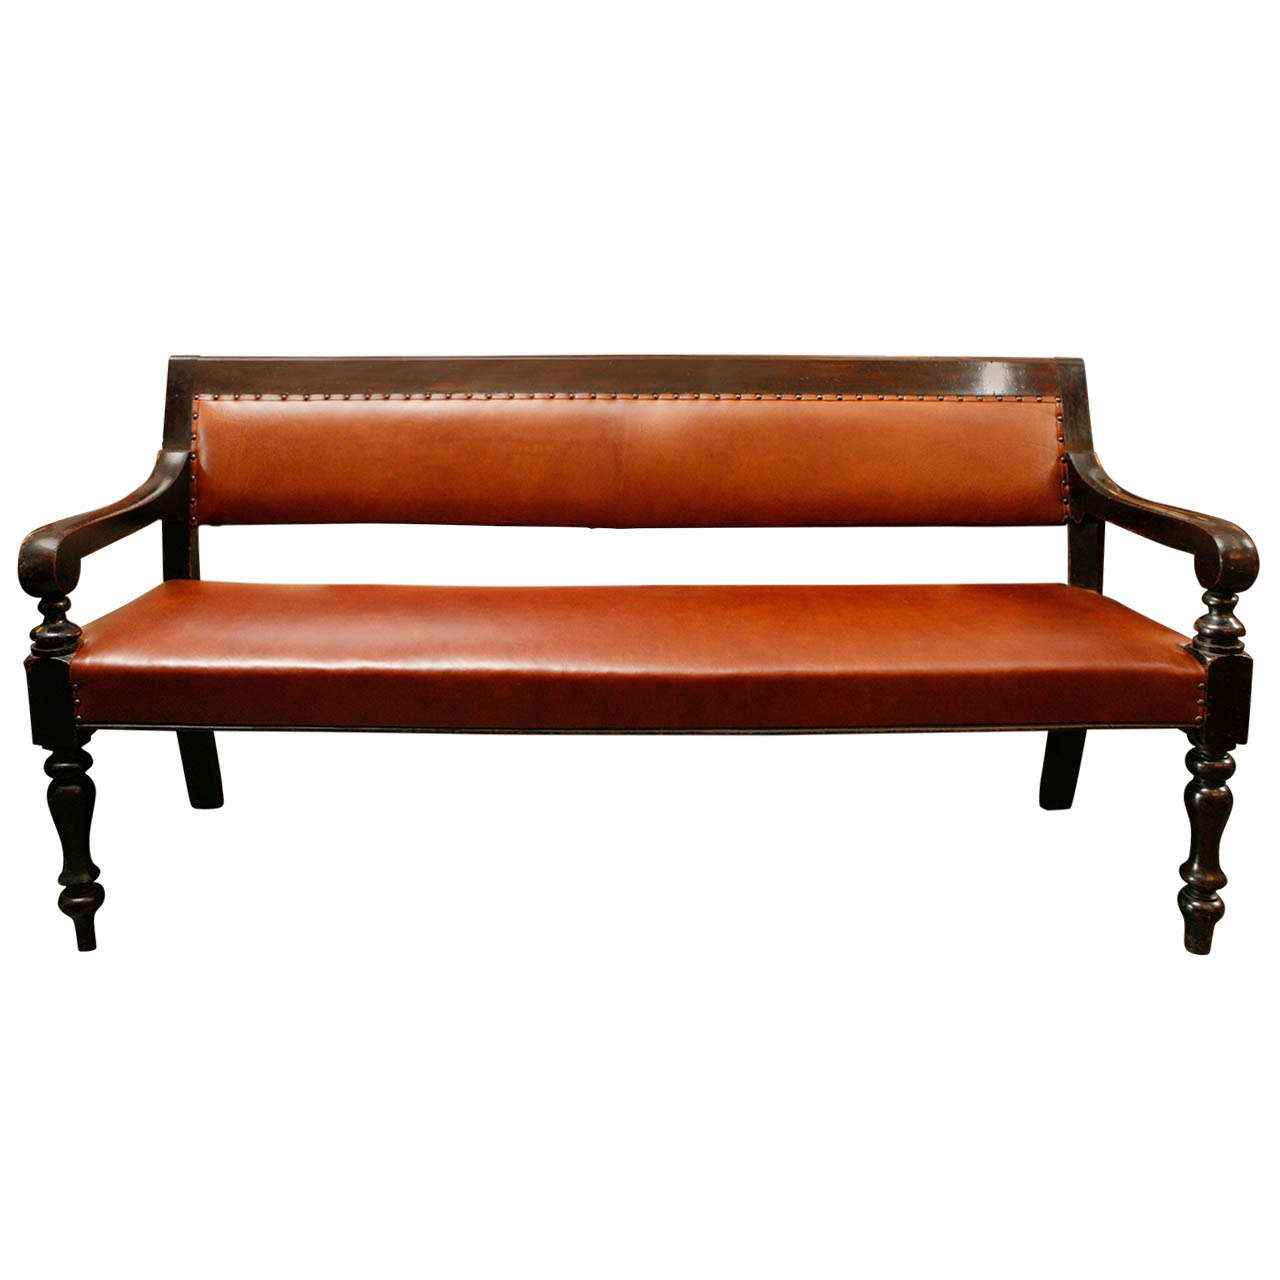 19th Century English Ebnonized and Upholstered Leather Bench from Masonic Lodge